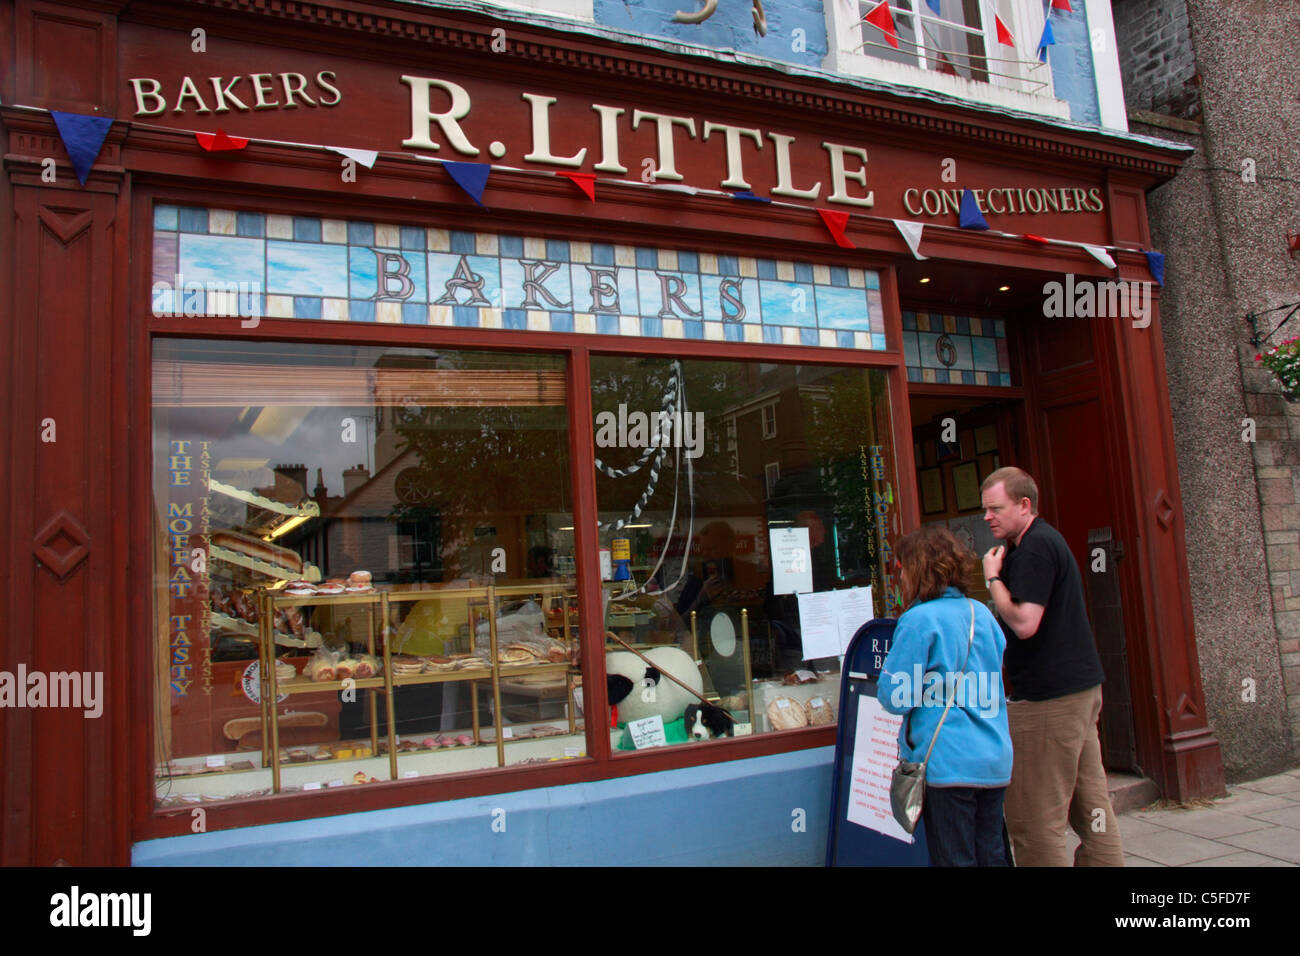 Bakers shop in Moffat, Dumfries and Galloway, Scotland. Stock Photo